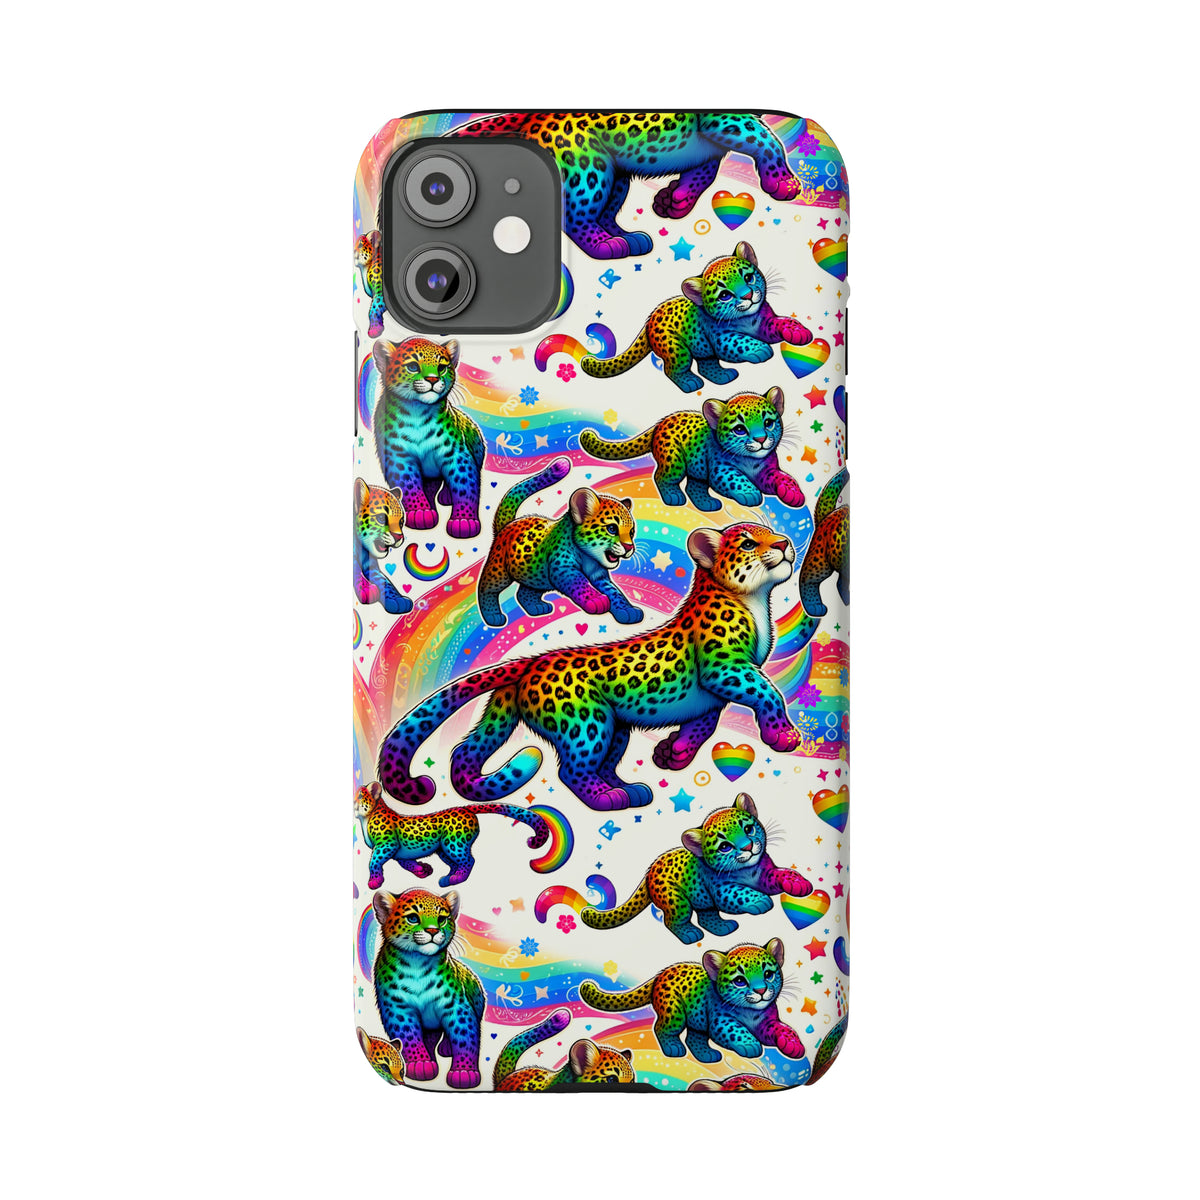 Leopard Lisa Frank Inspired Colorful Phone Case